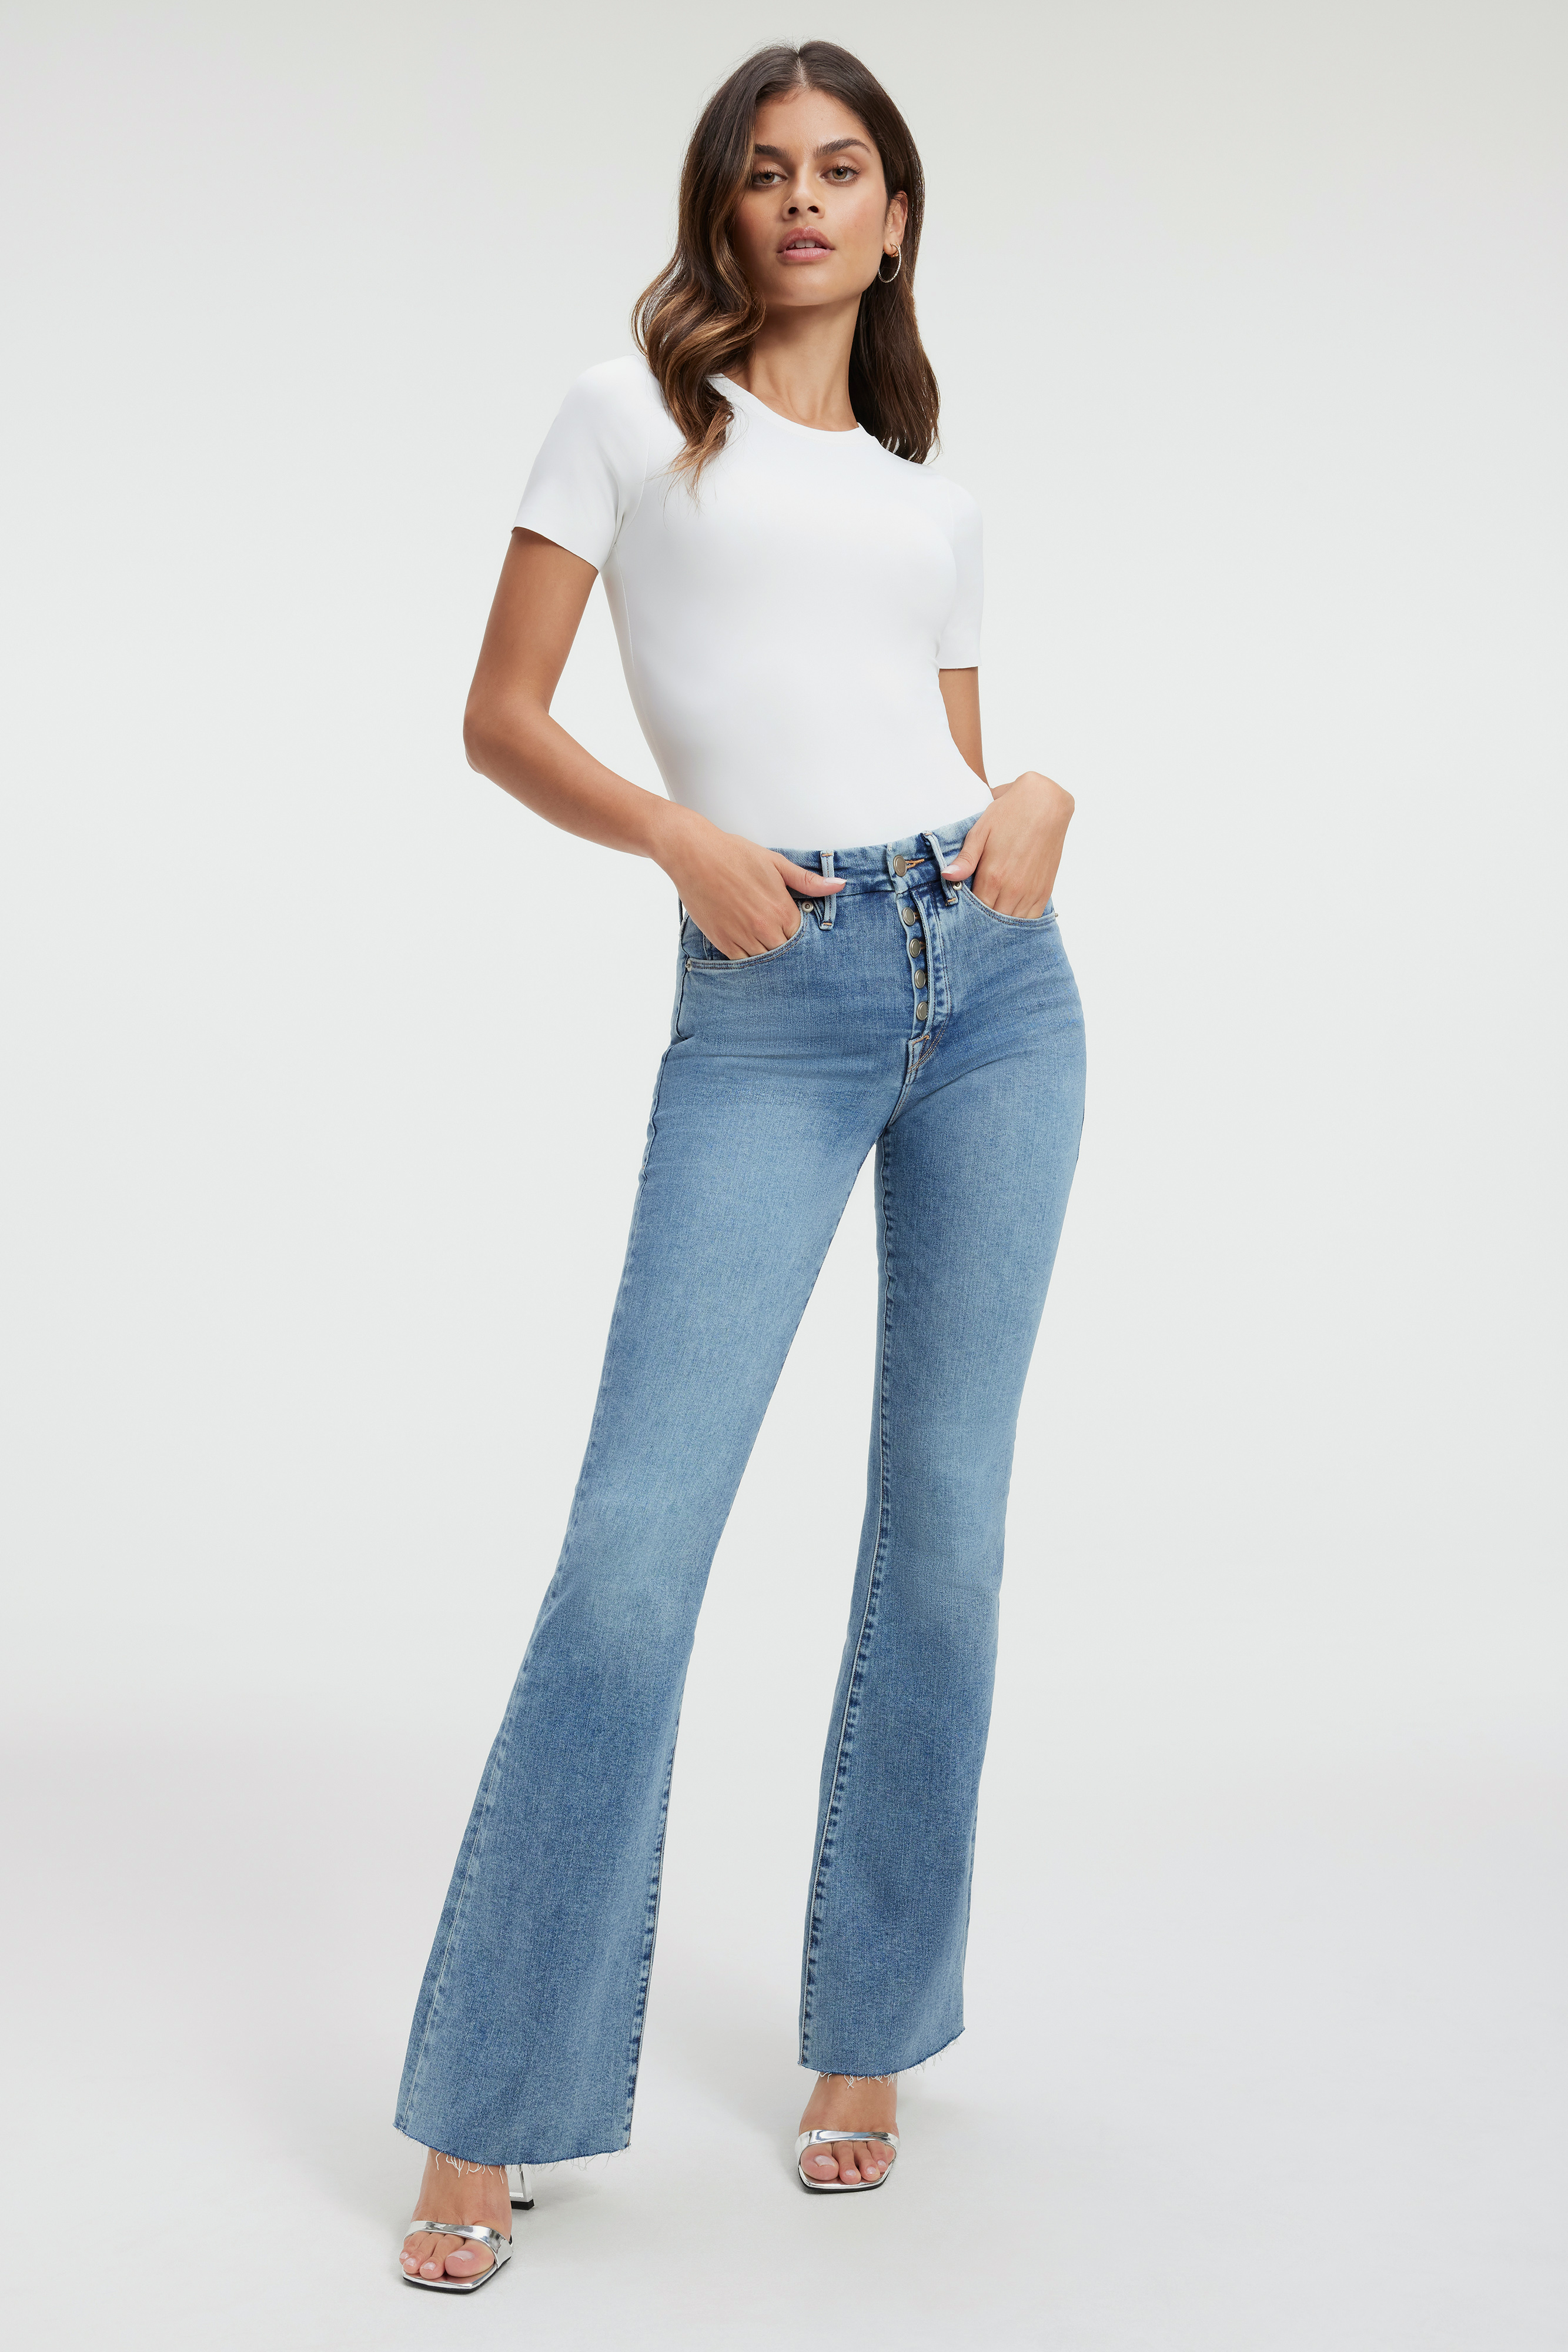 Styled with GOOD LEGS FLARE JEANS | INDIGO330